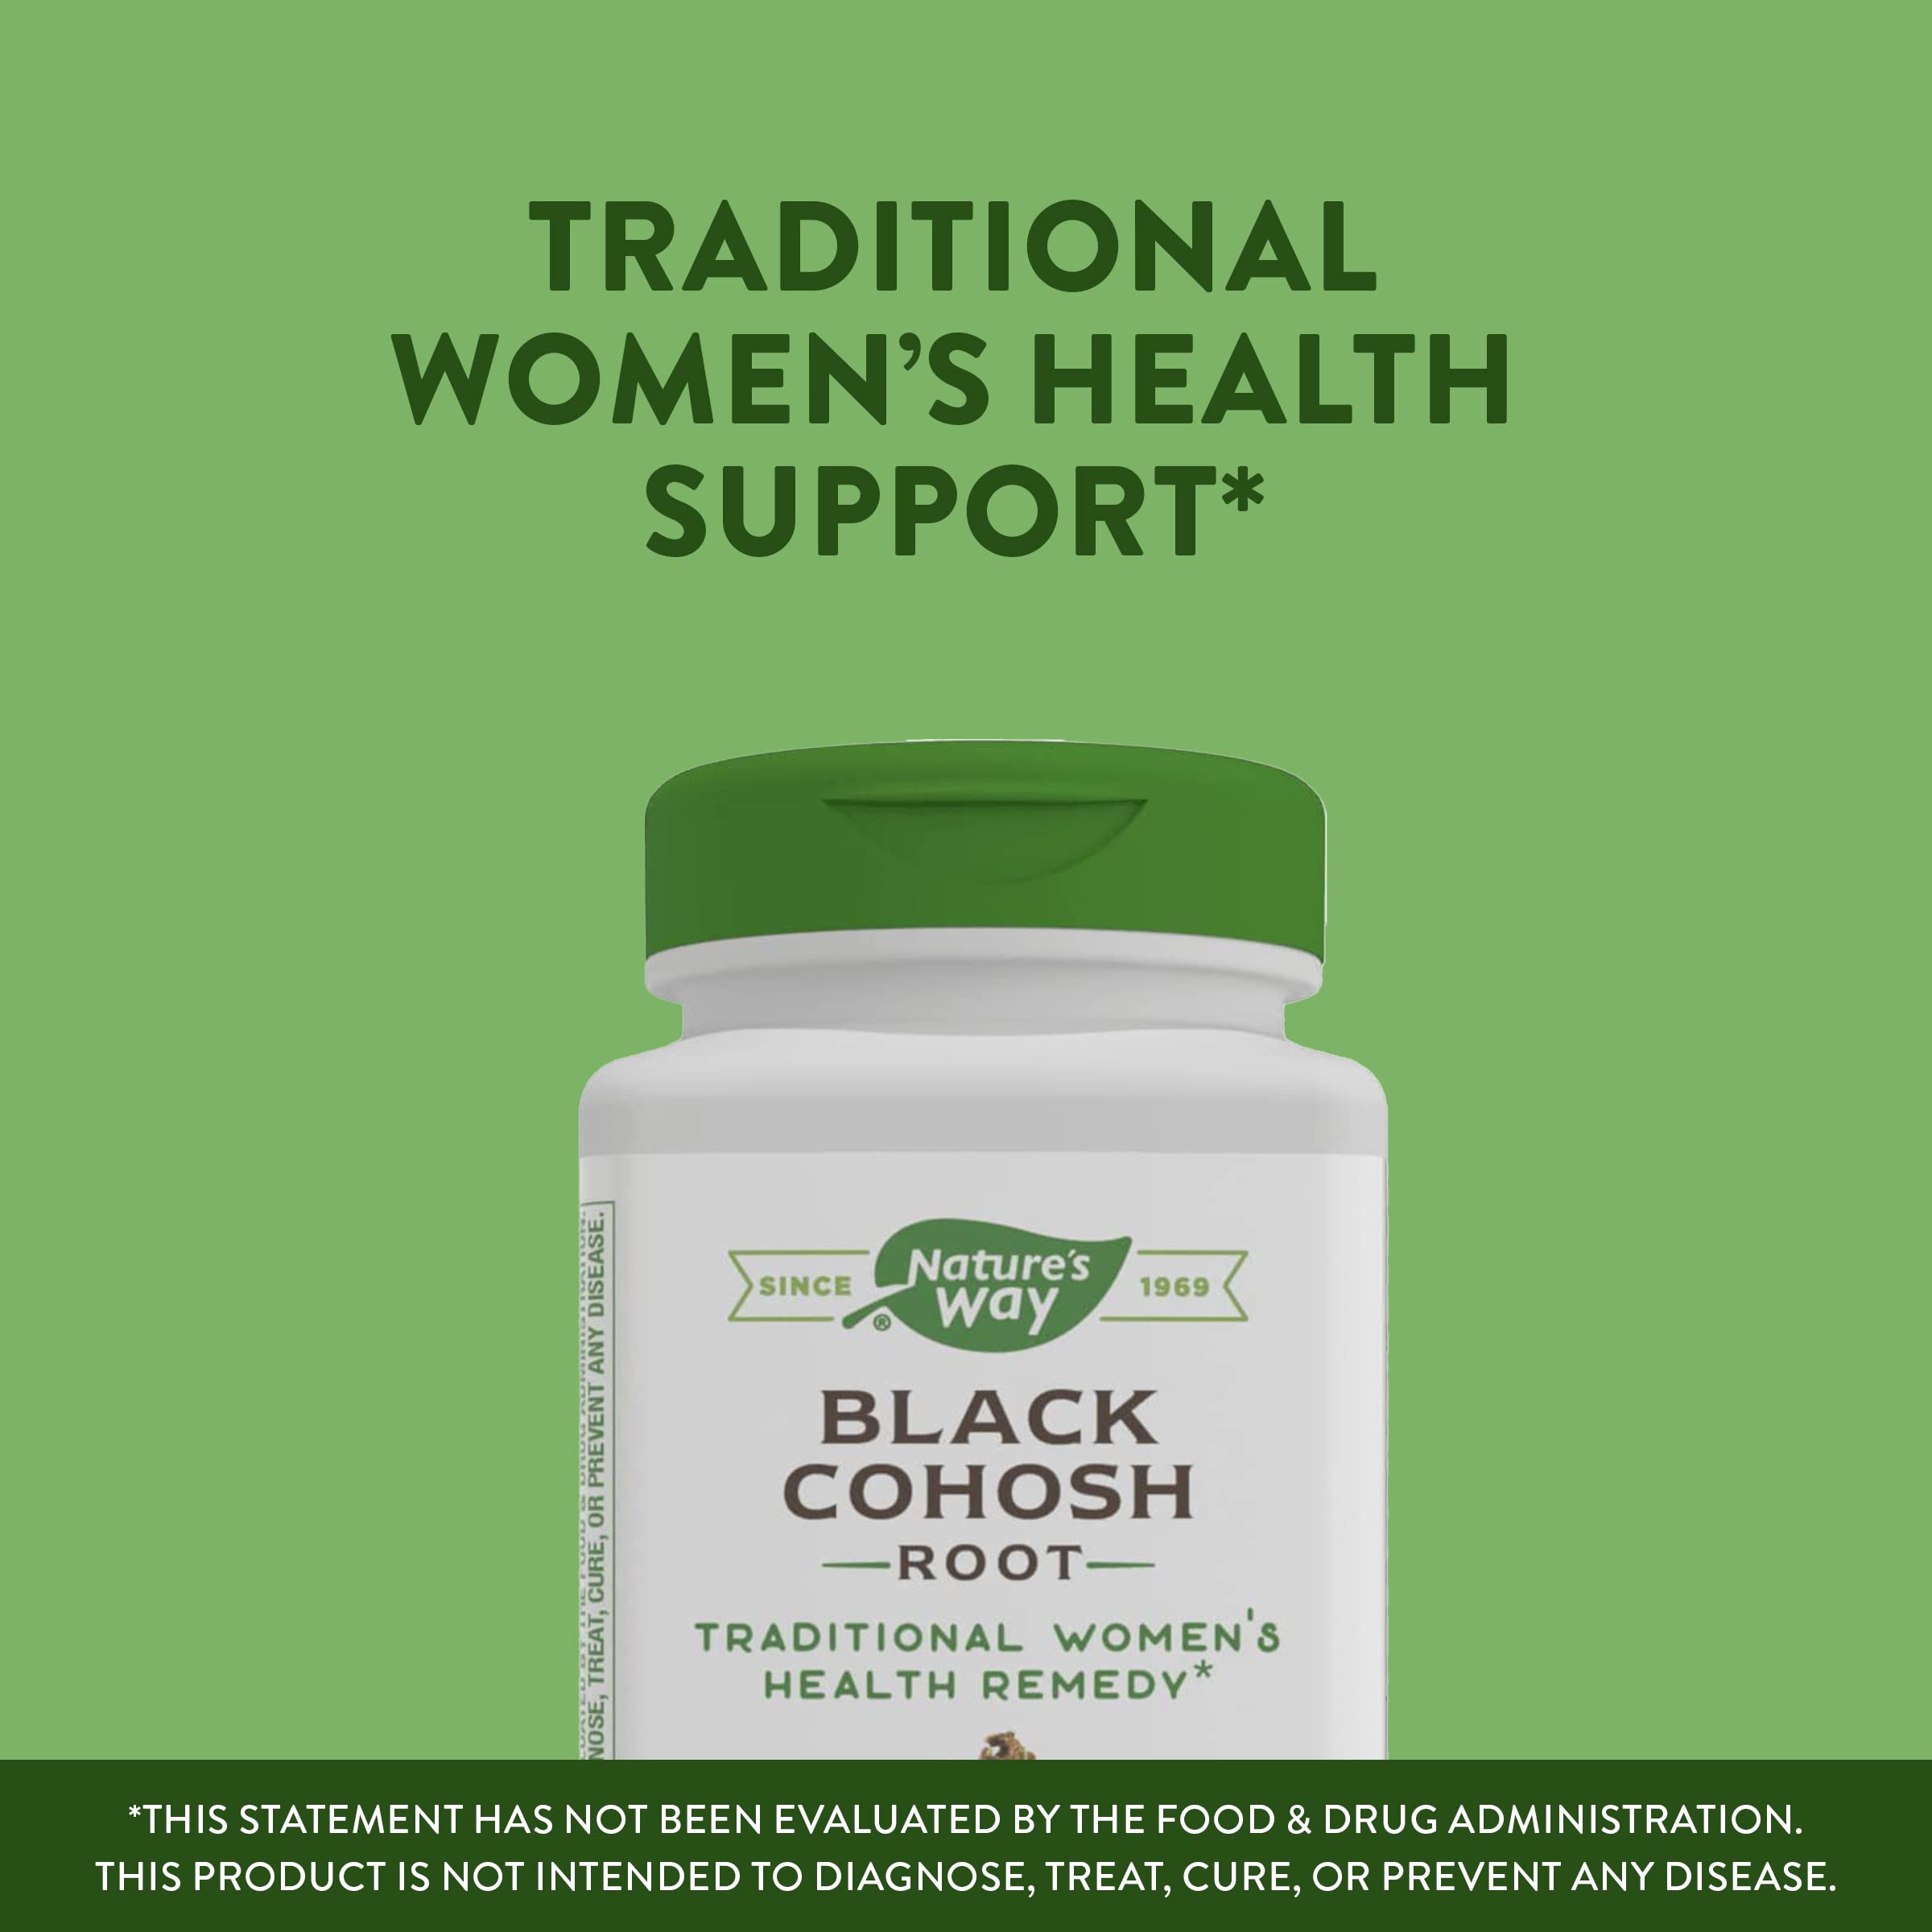 Nature's Way Black Cohosh Root, Traditional Support for Women's Health*, 540 mg, 180 Vegan Capsules & Premium St. John’s Wort Herb, Promotes A Positive Outlook*, 700 mg per serving, 180 Vegan Capsules